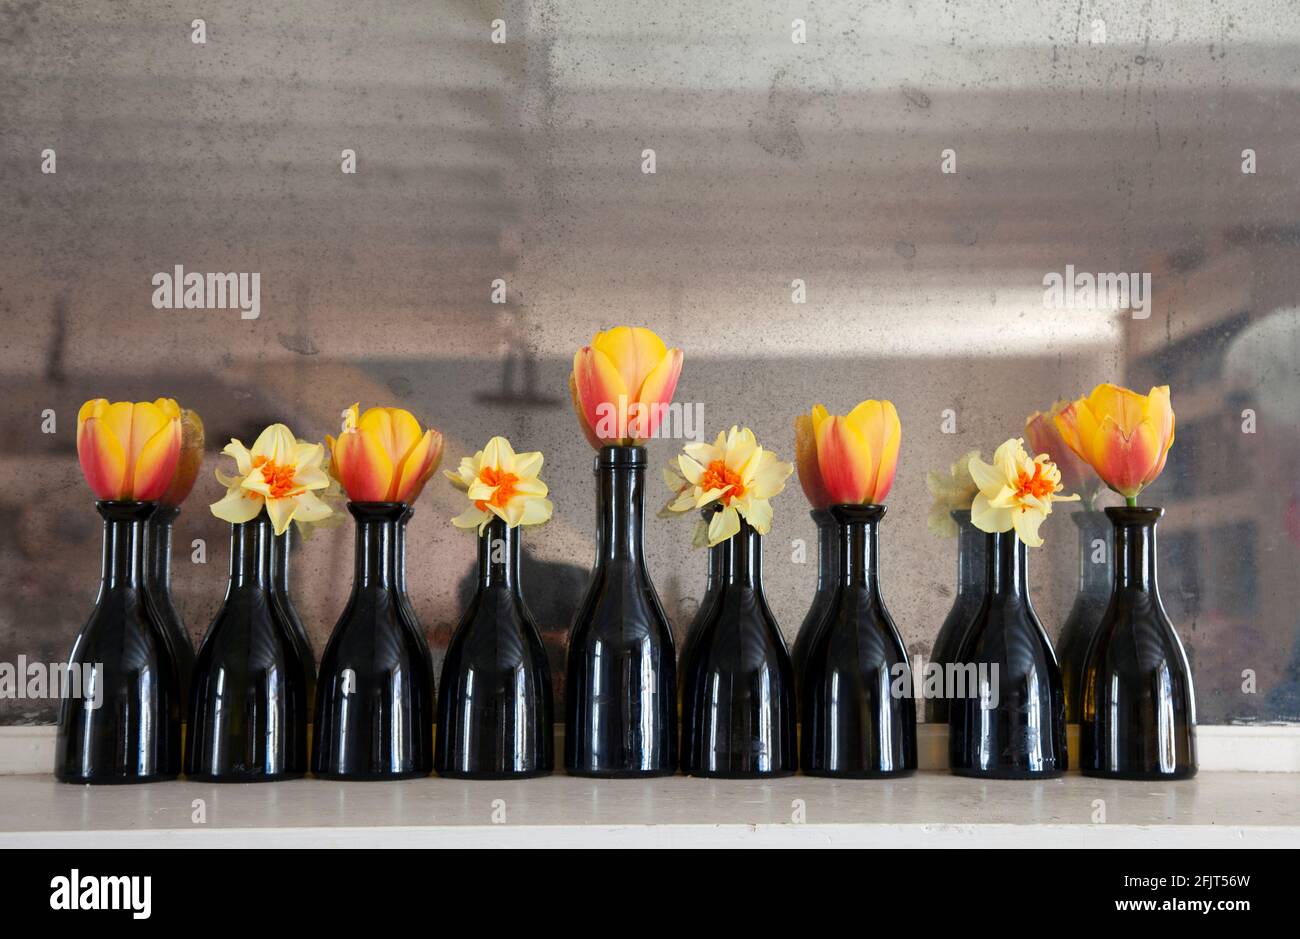 Tulips and daffodils displayed in Lidl Balsamic vinegar bottles Stock Photo